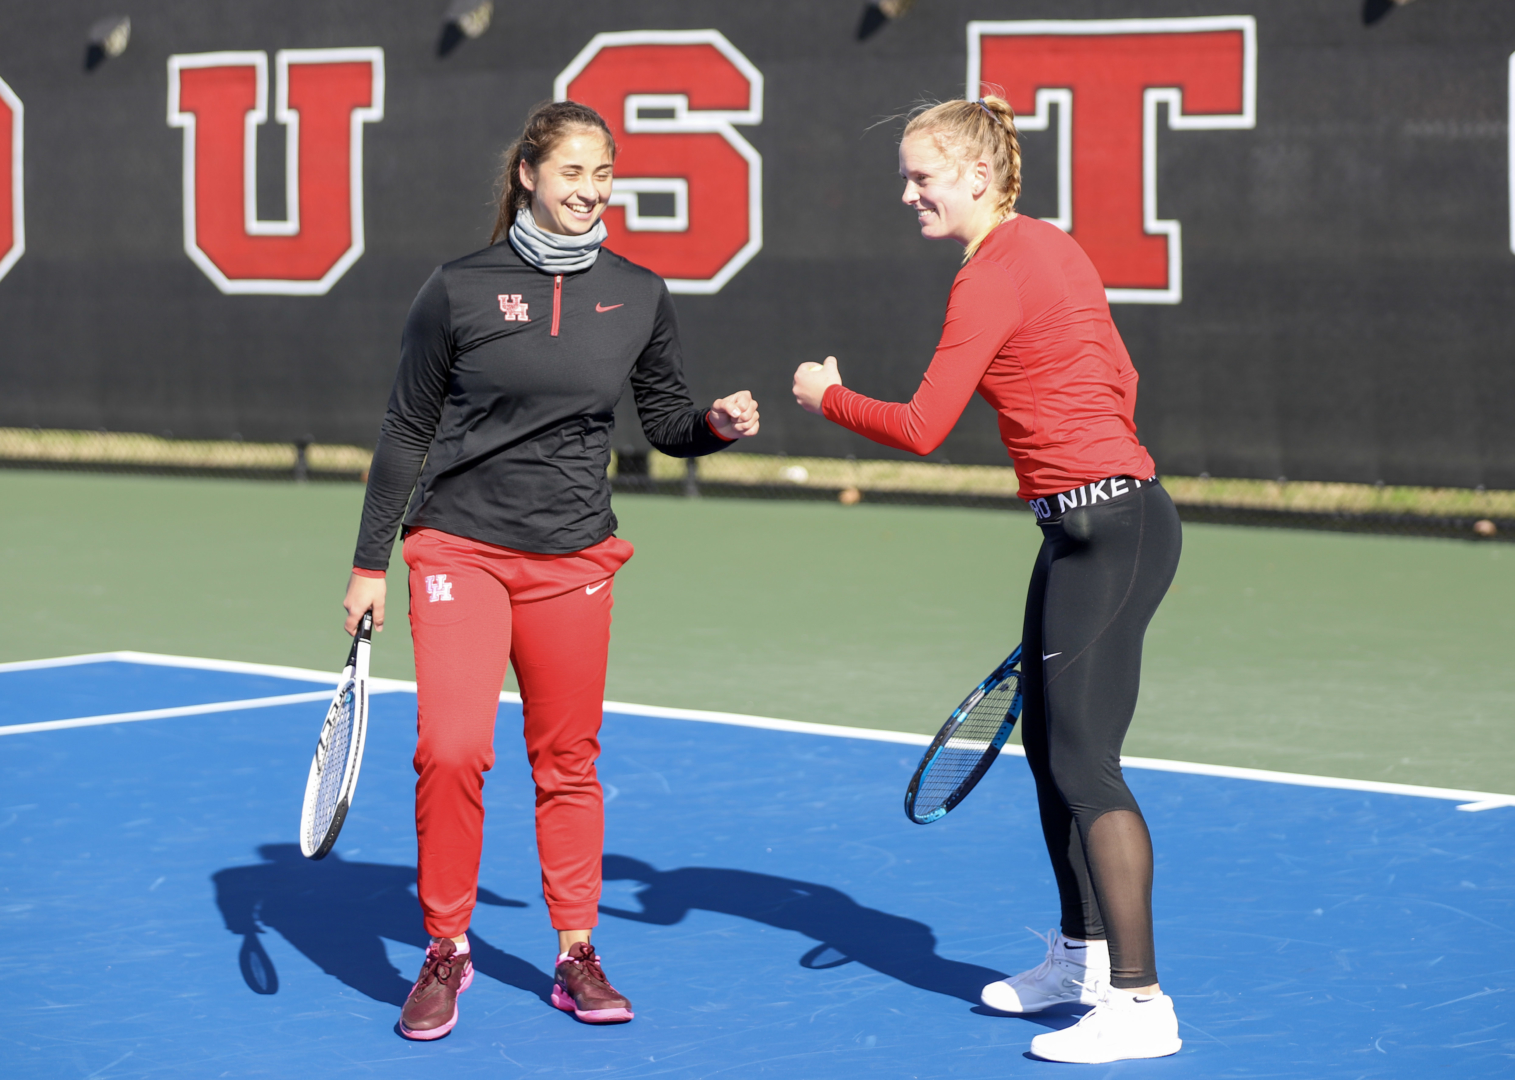 From start to finish, UH tennis dominated both of its matches against Prairie View A&M on Friday. | James Mueller/The Cougar